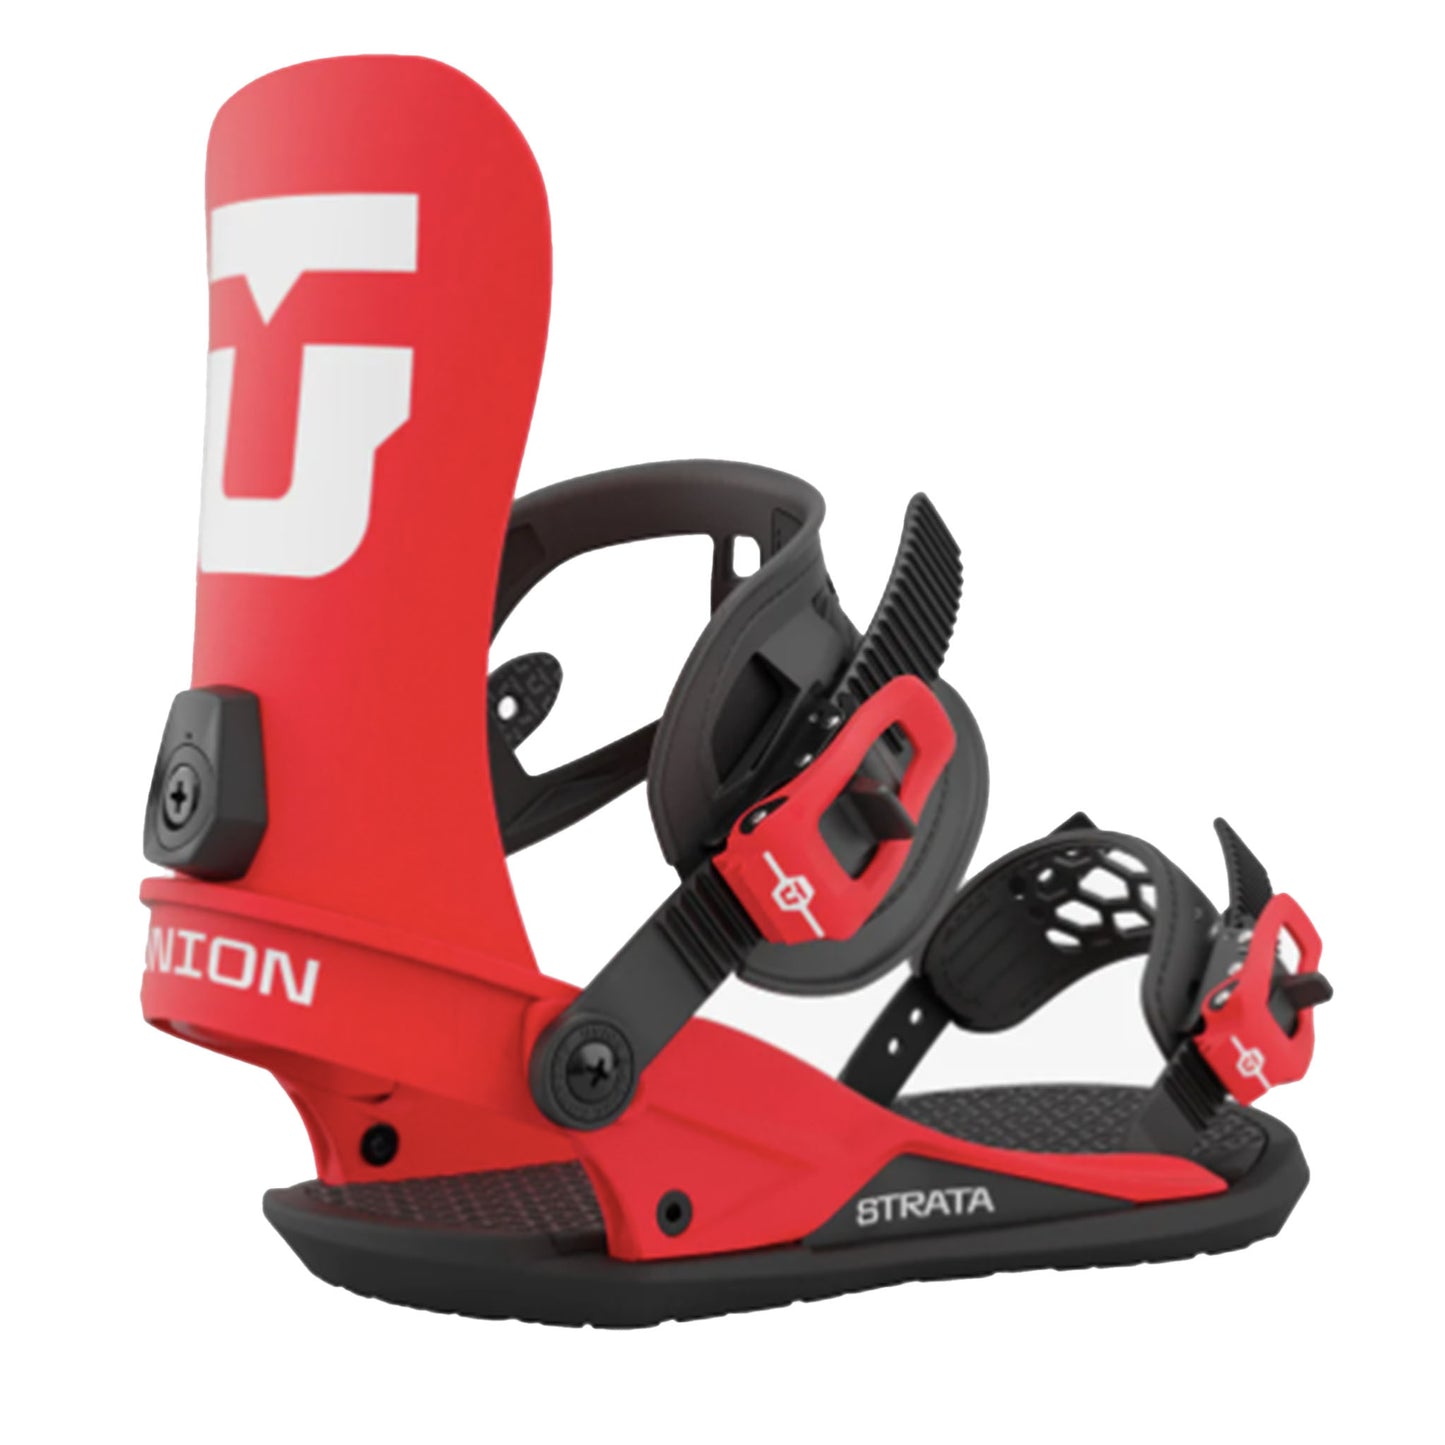 Union Strata Freestyle Snowboard Bindings in Red